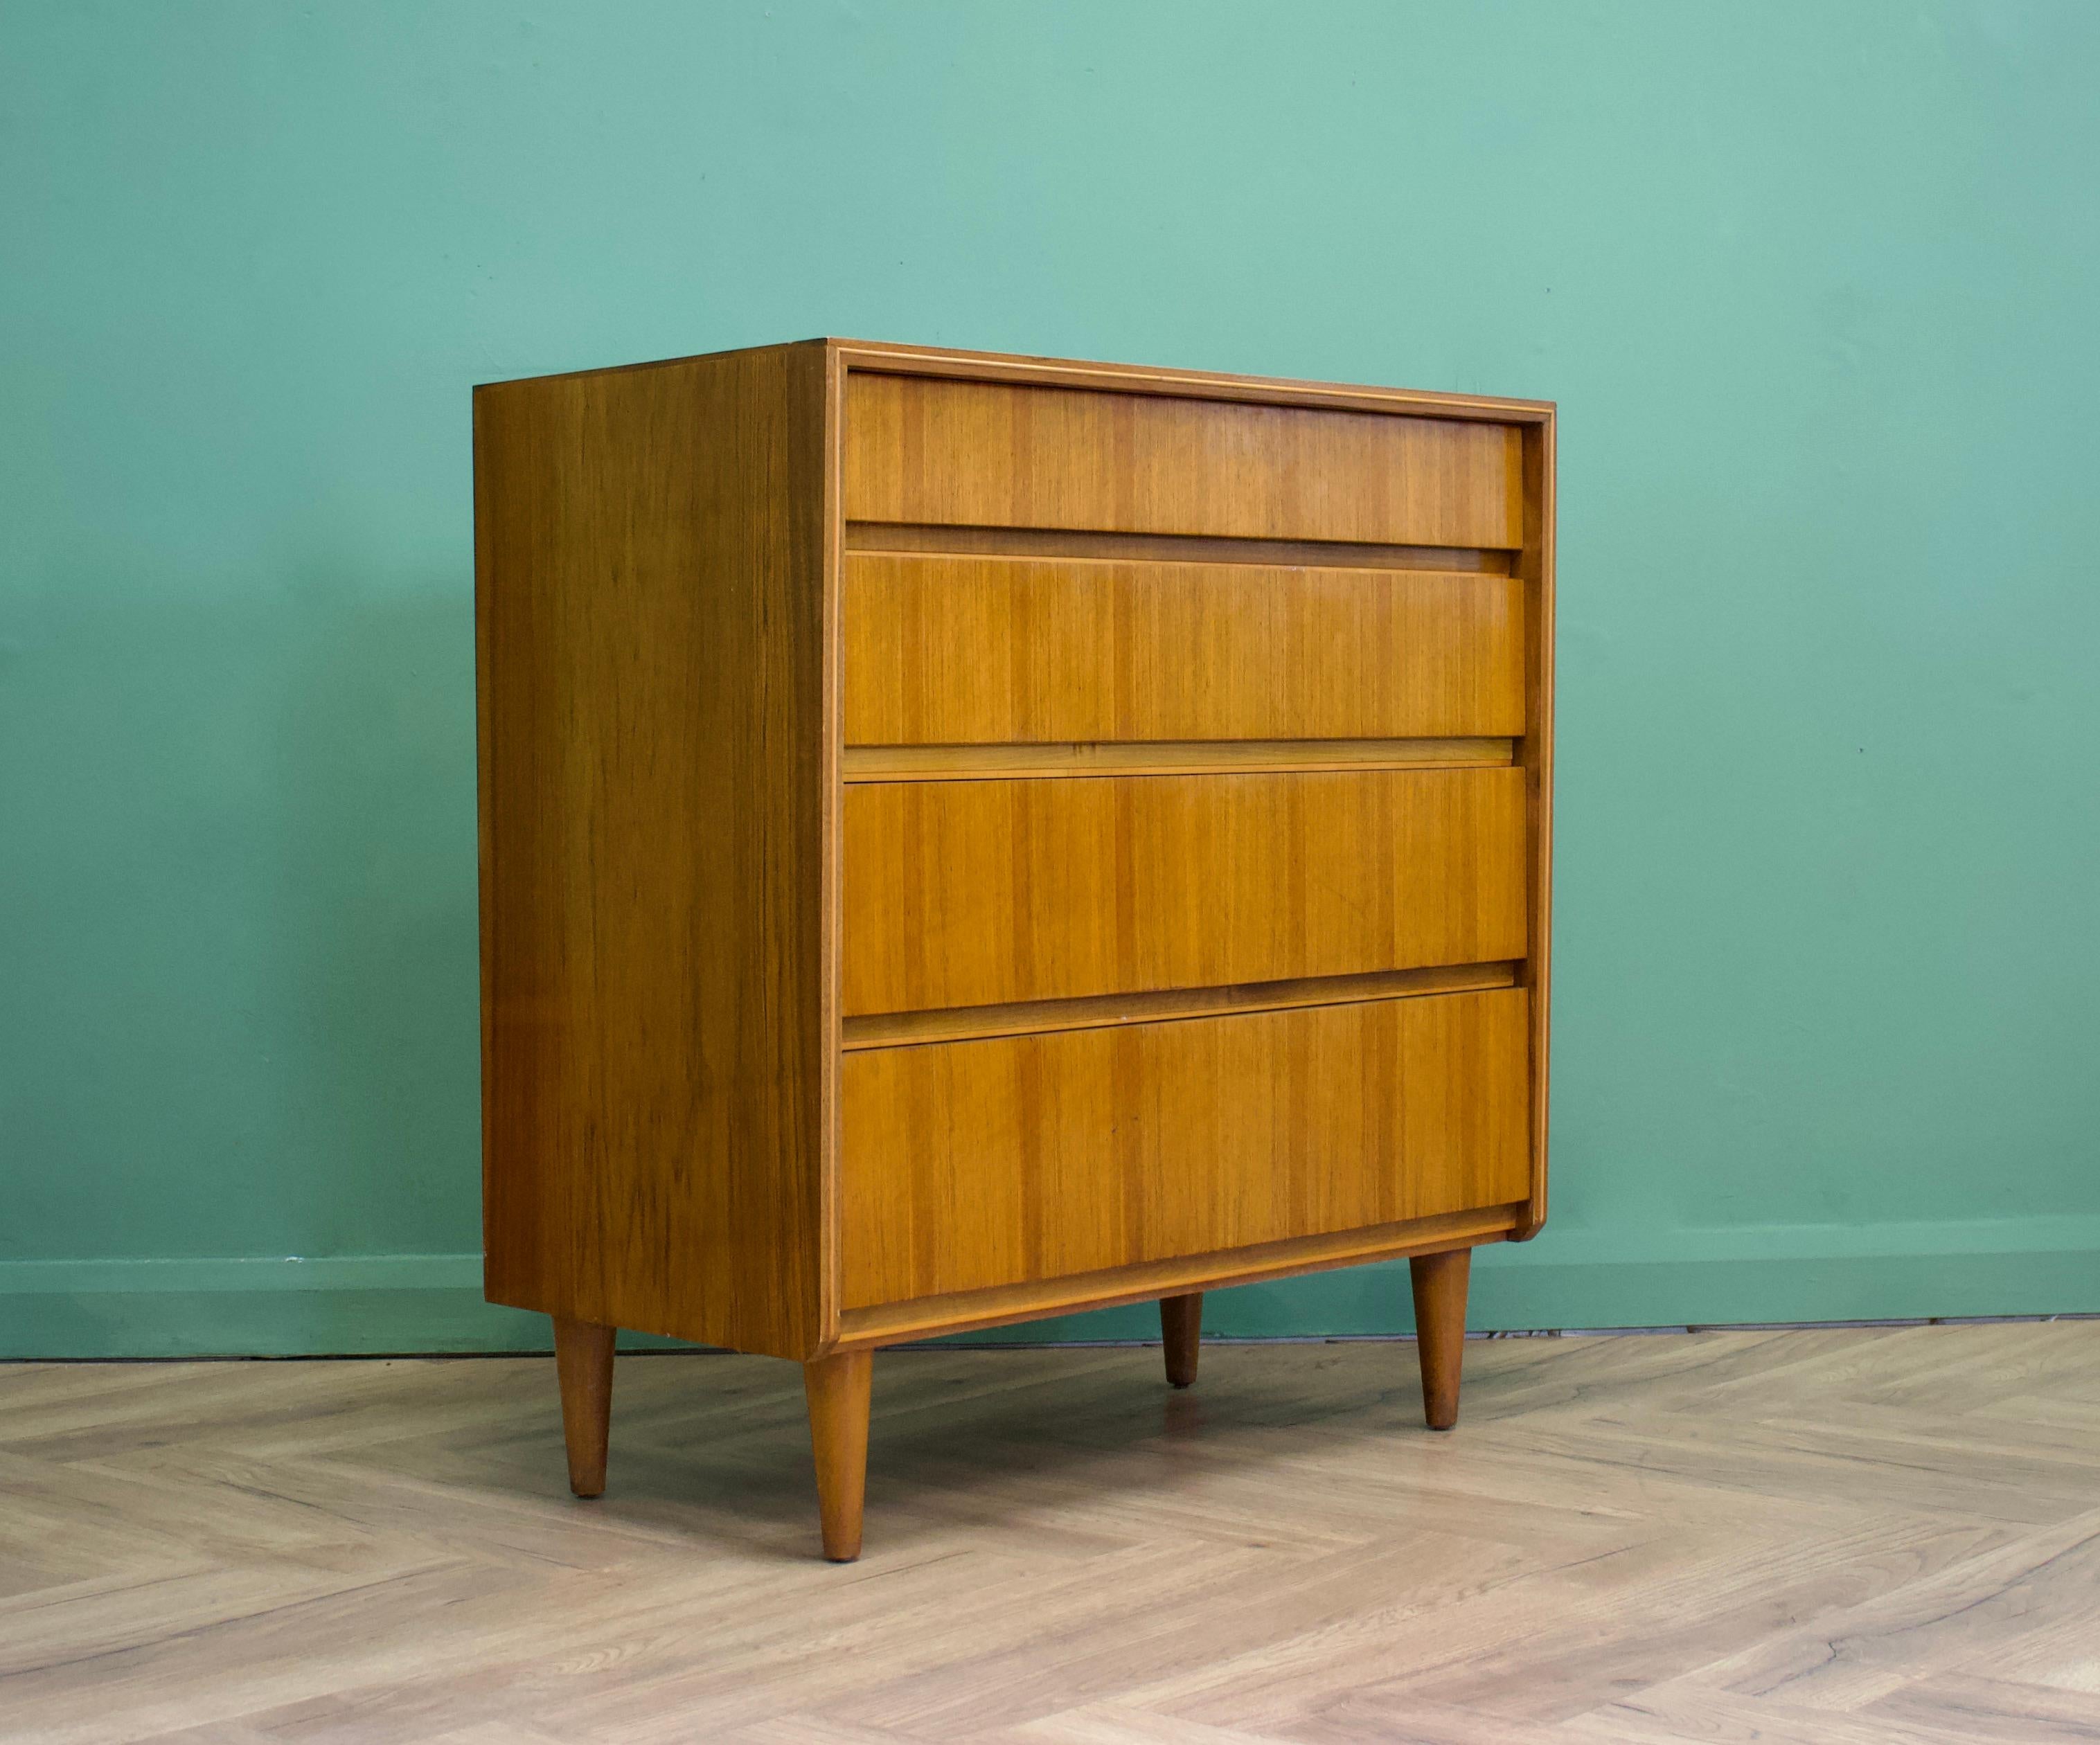 A walnut chest of drawers from Bath Cabinet Makers London
They have a unique tapered design
Featuring 4 drawers.